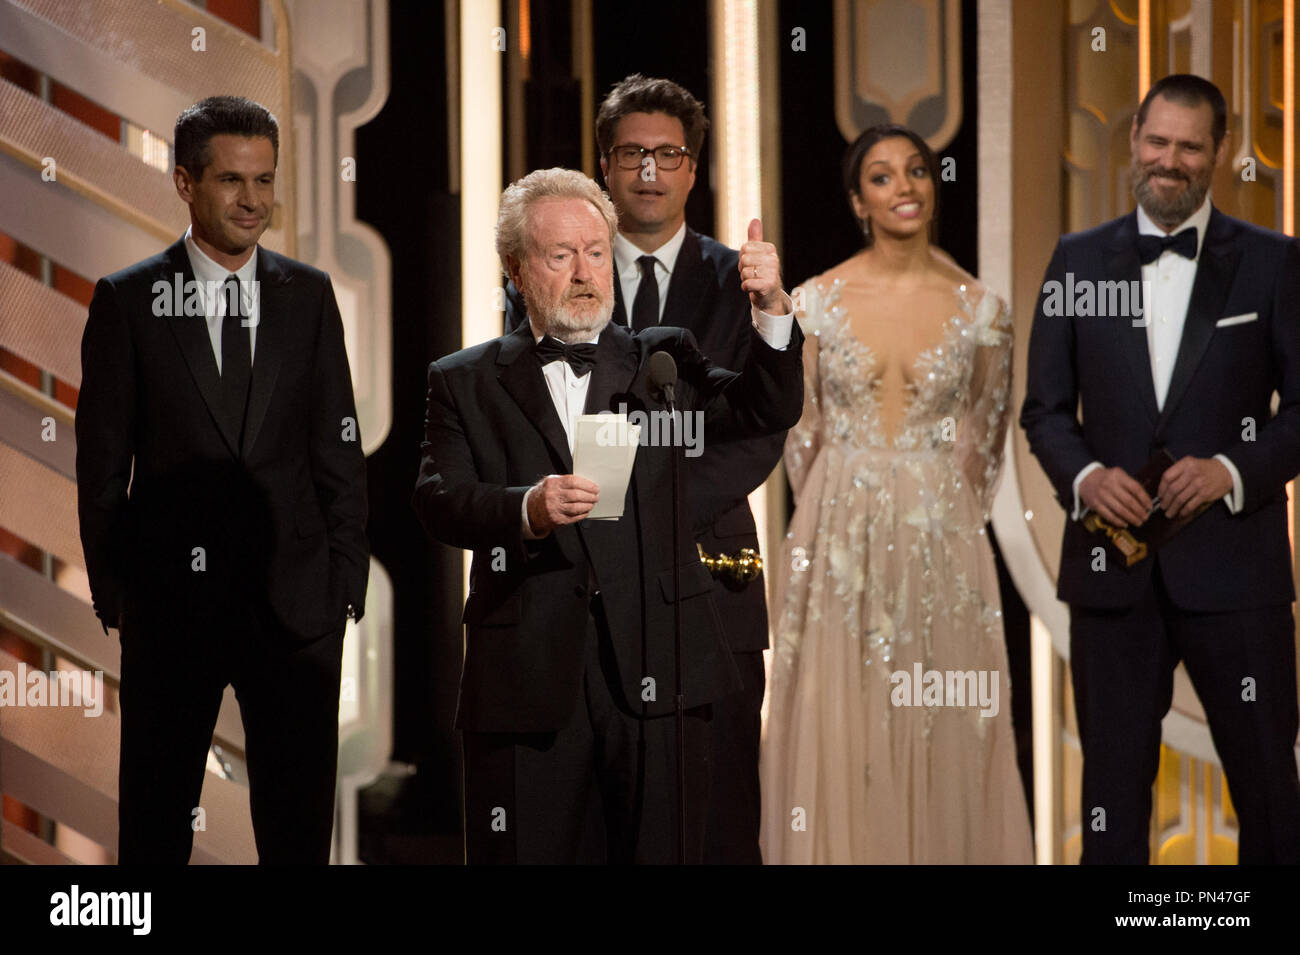 Accepting the Golden Globe for BEST MOTION PICTURE – COMEDY OR MUSICAL for 'The Martian' is (Replace with Name of Acceptors) at the 73rd Annual Golden Globe Awards at the Beverly Hilton in Beverly Hills, CA on Sunday, January 10, 2016. Stock Photo